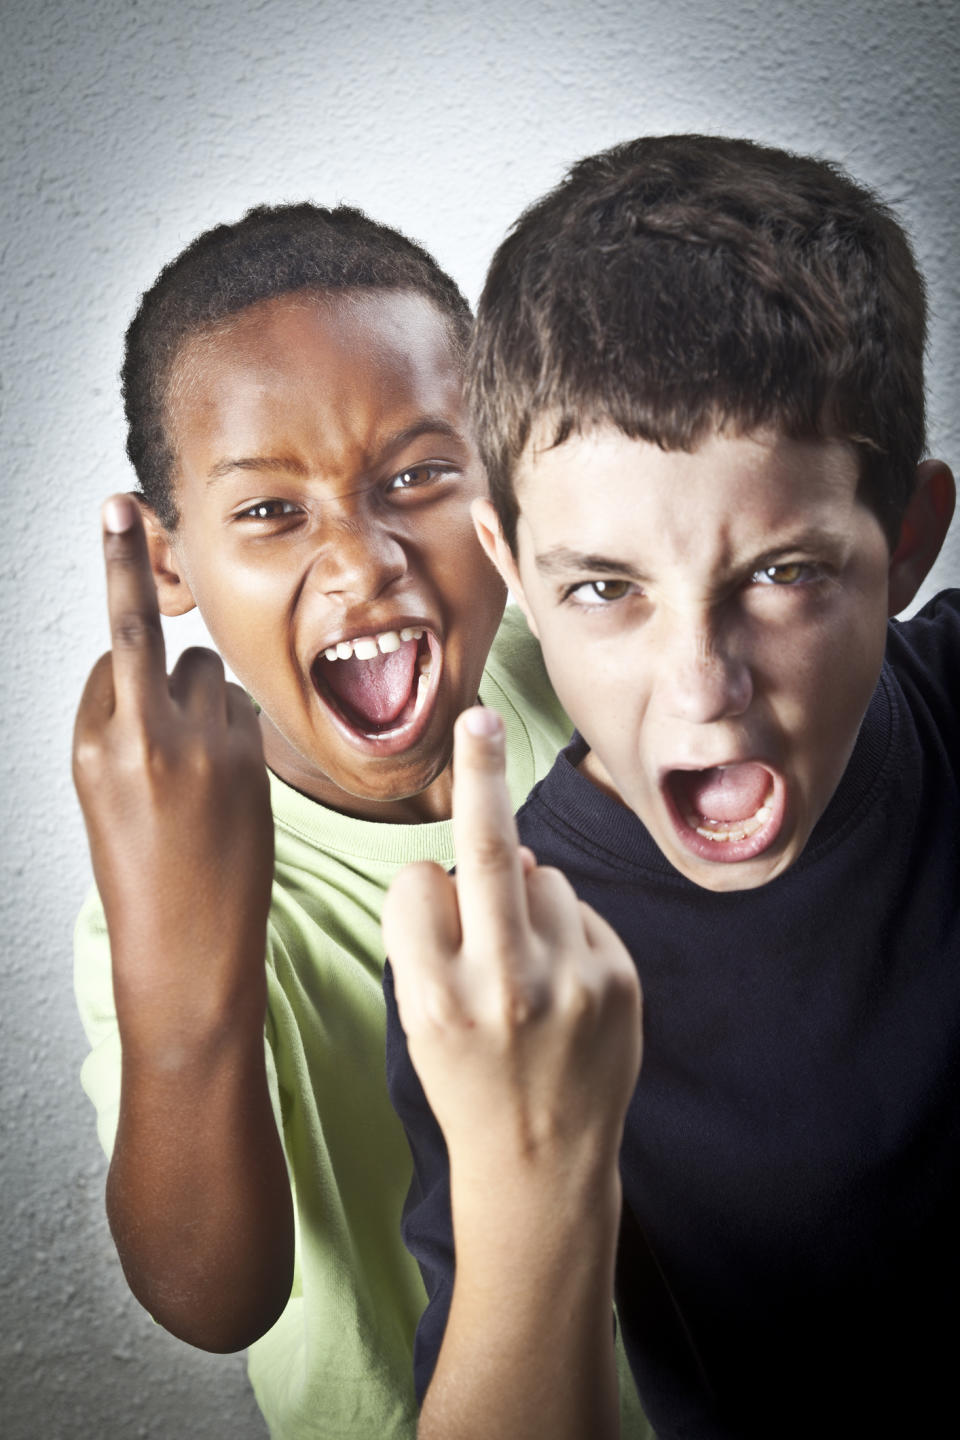 Two boys, one wearing a light shirt and the other a dark shirt, are making faces and showing their middle fingers to the camera in a playful manner